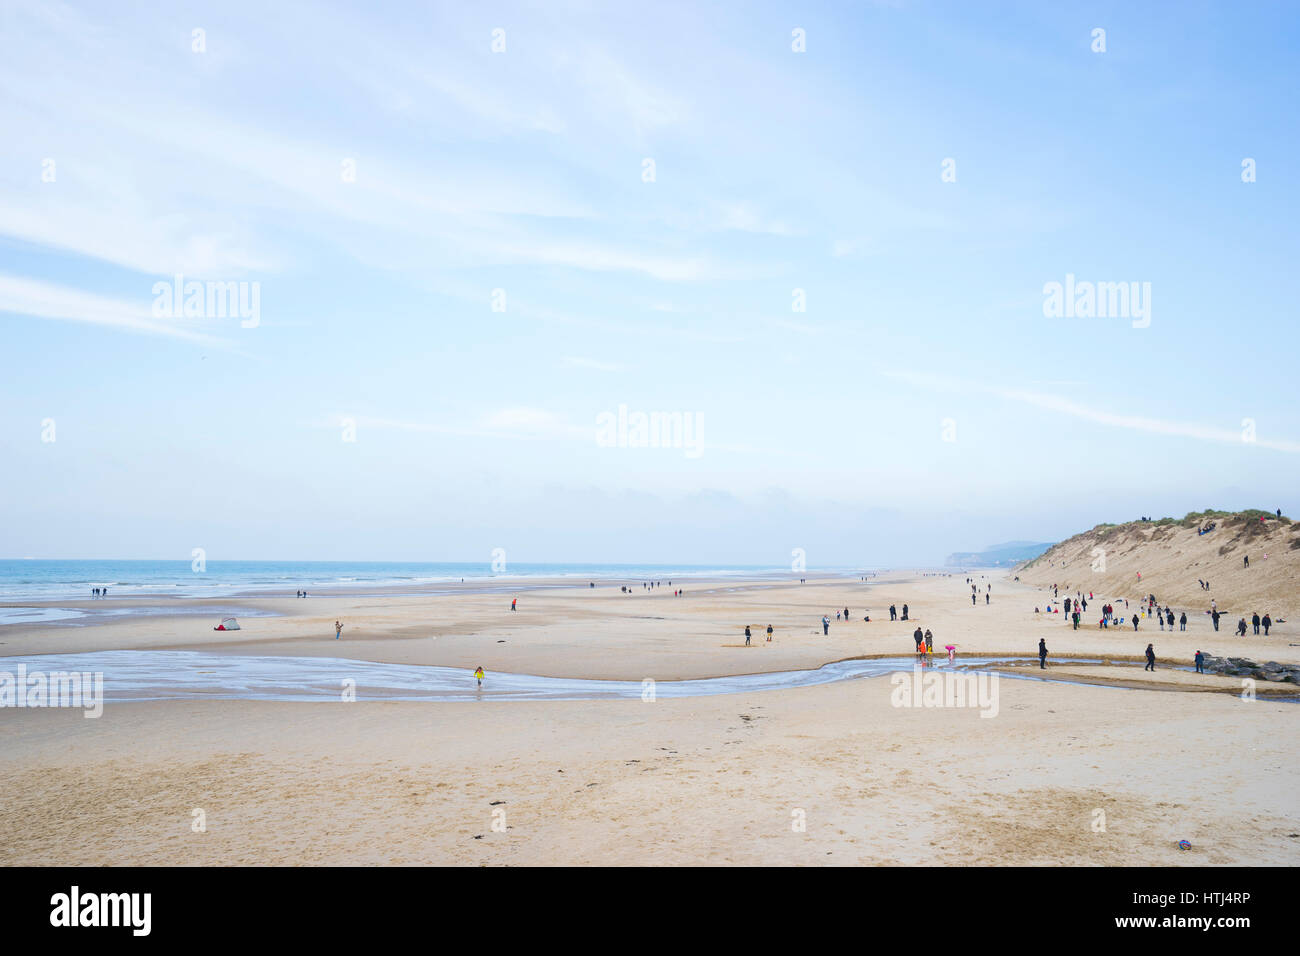 quiet beach scenery at Hardelot Plage, Cote d'Opale, France Stock Photo